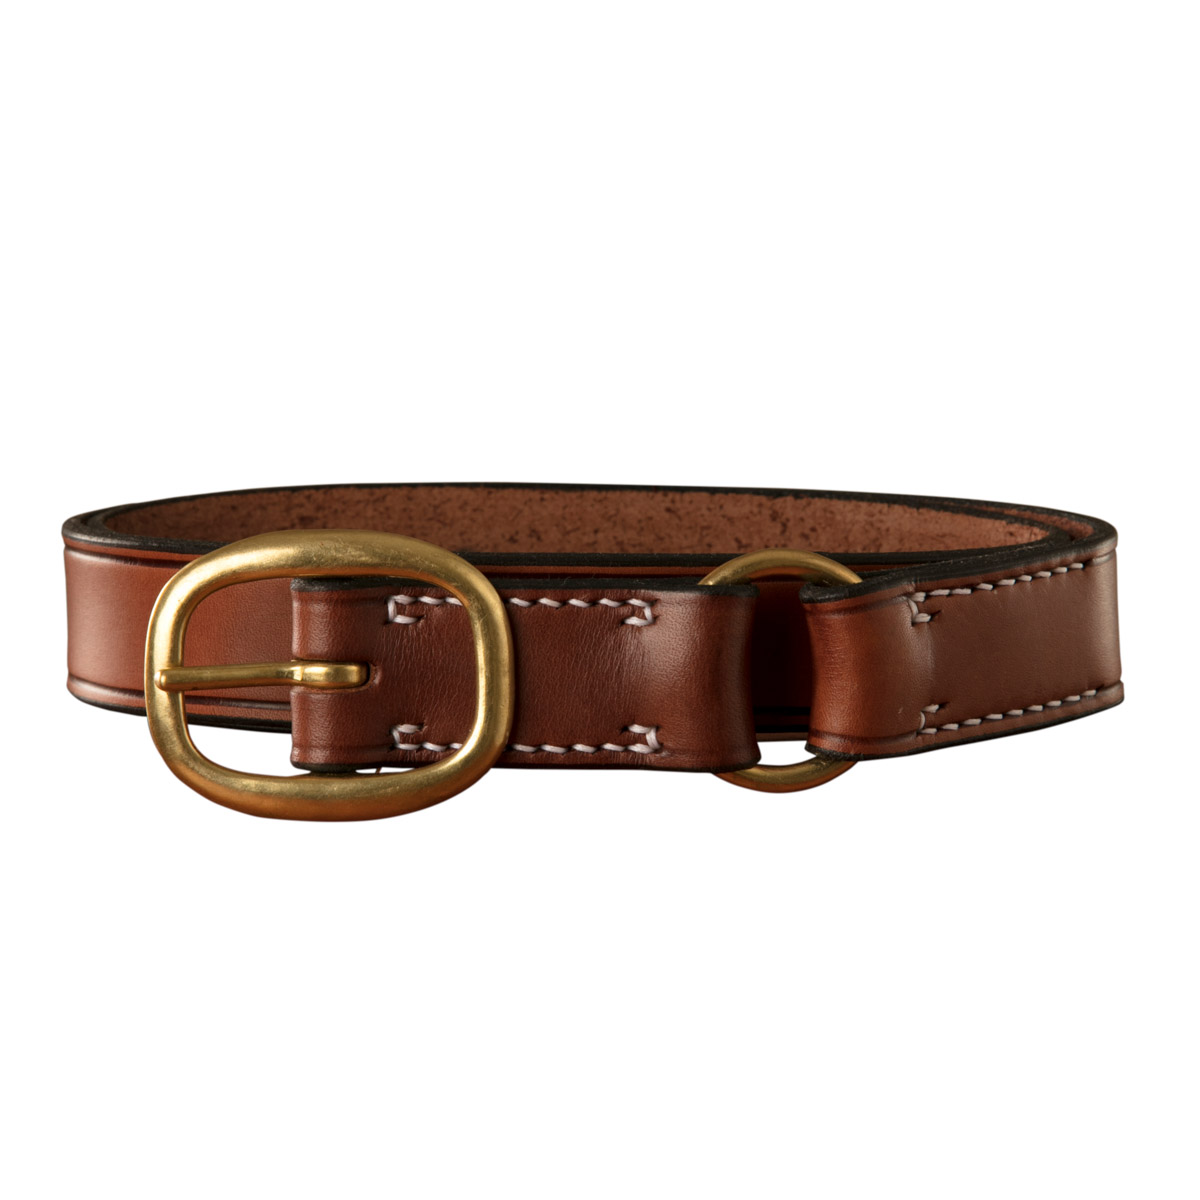 Stockmans Belt, Solid Leather, with Brass Swage Buckle and Ring 1